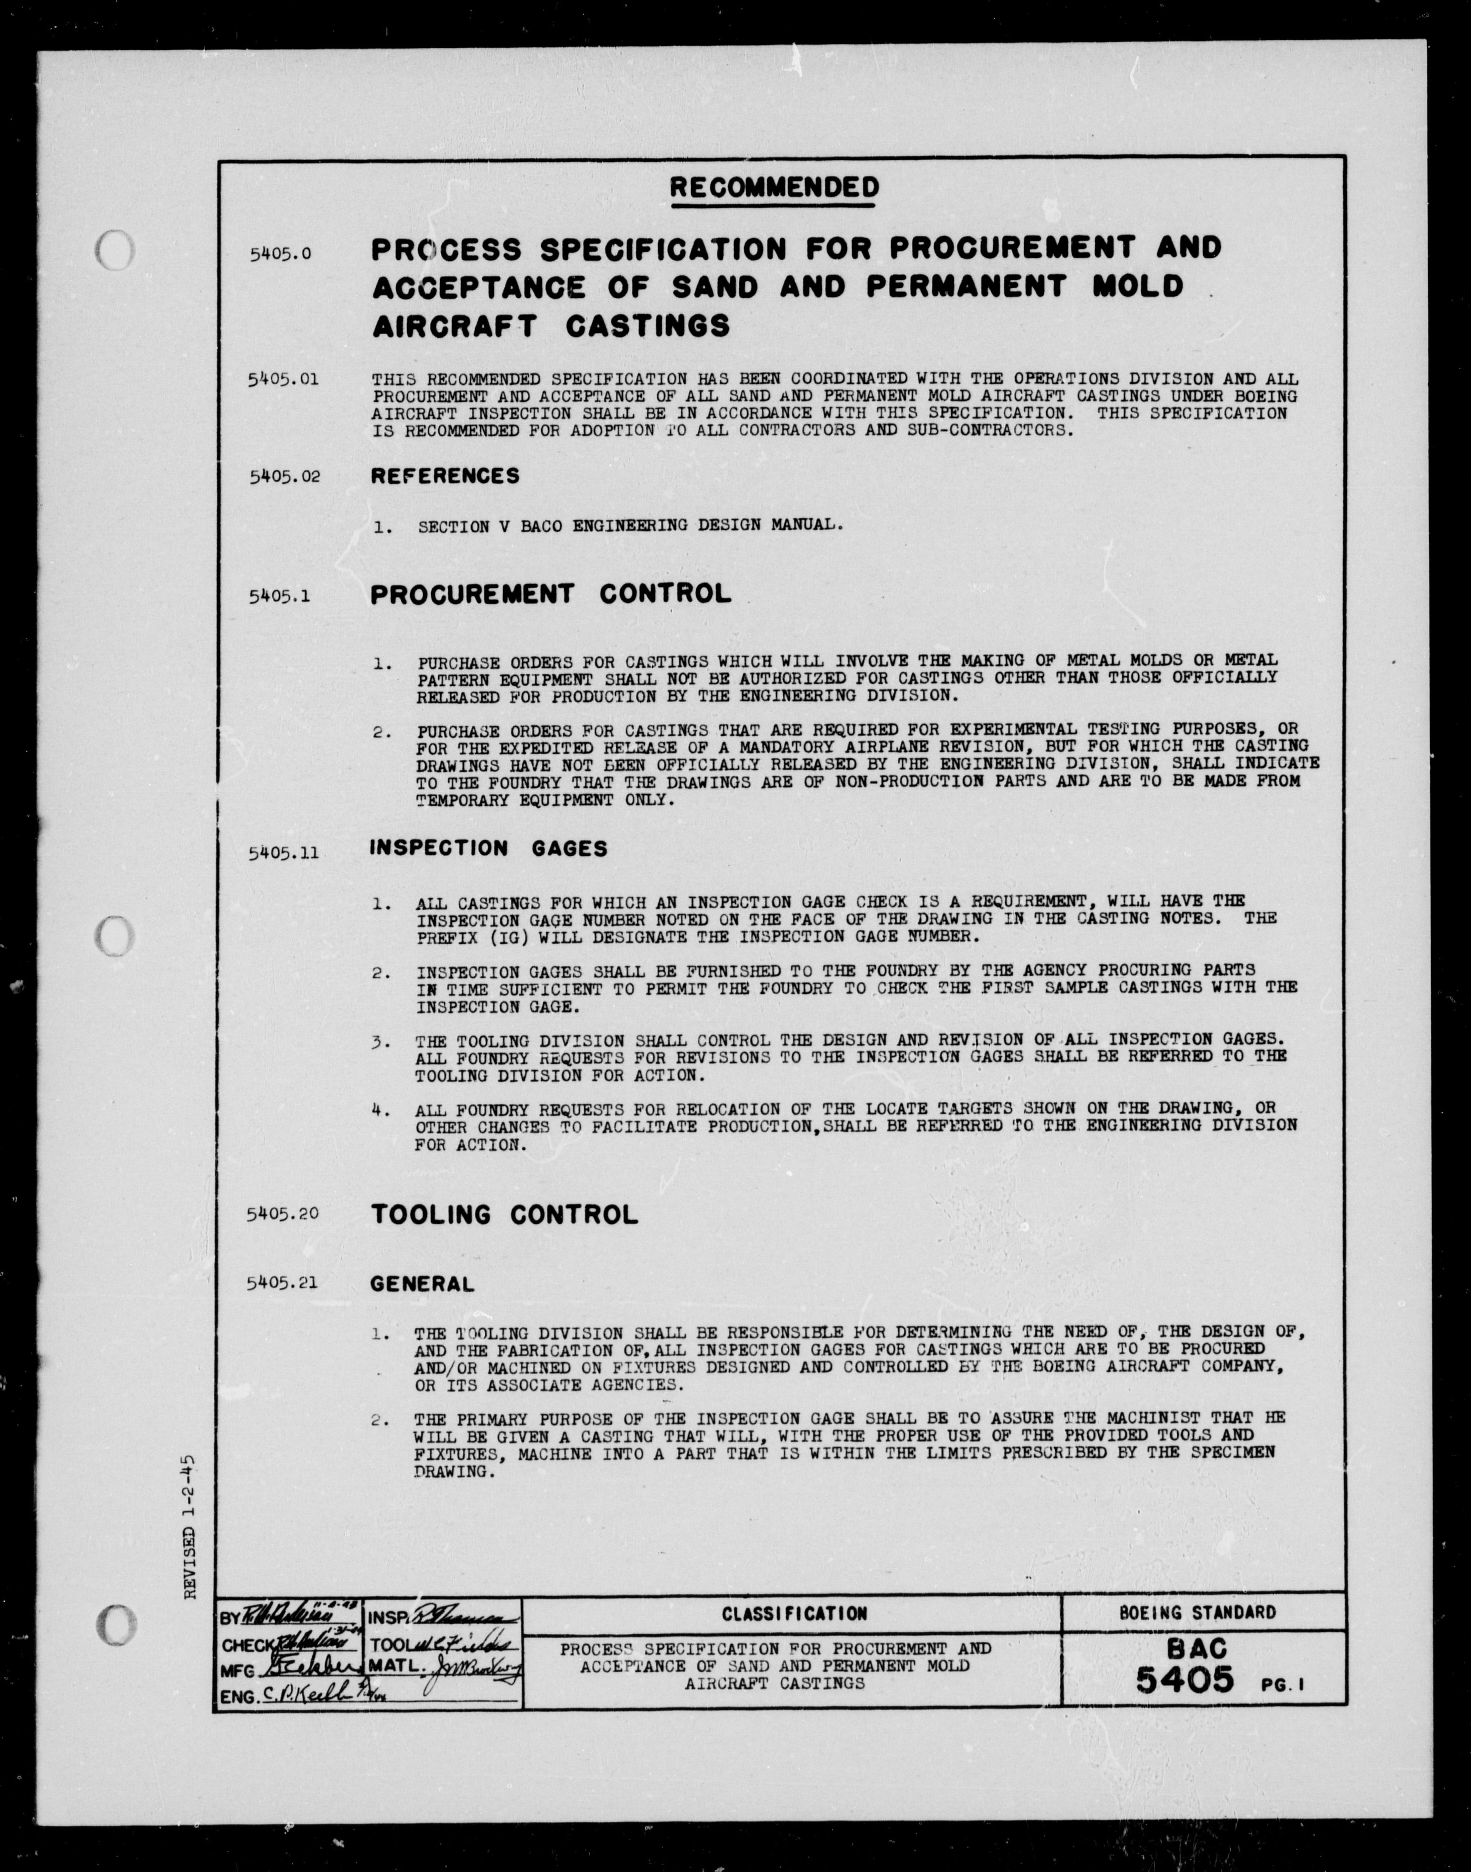 Sample page 1 from AirCorps Library document: Procurement and Acceptance of Sand and Permanent Mold Aircraft Castings